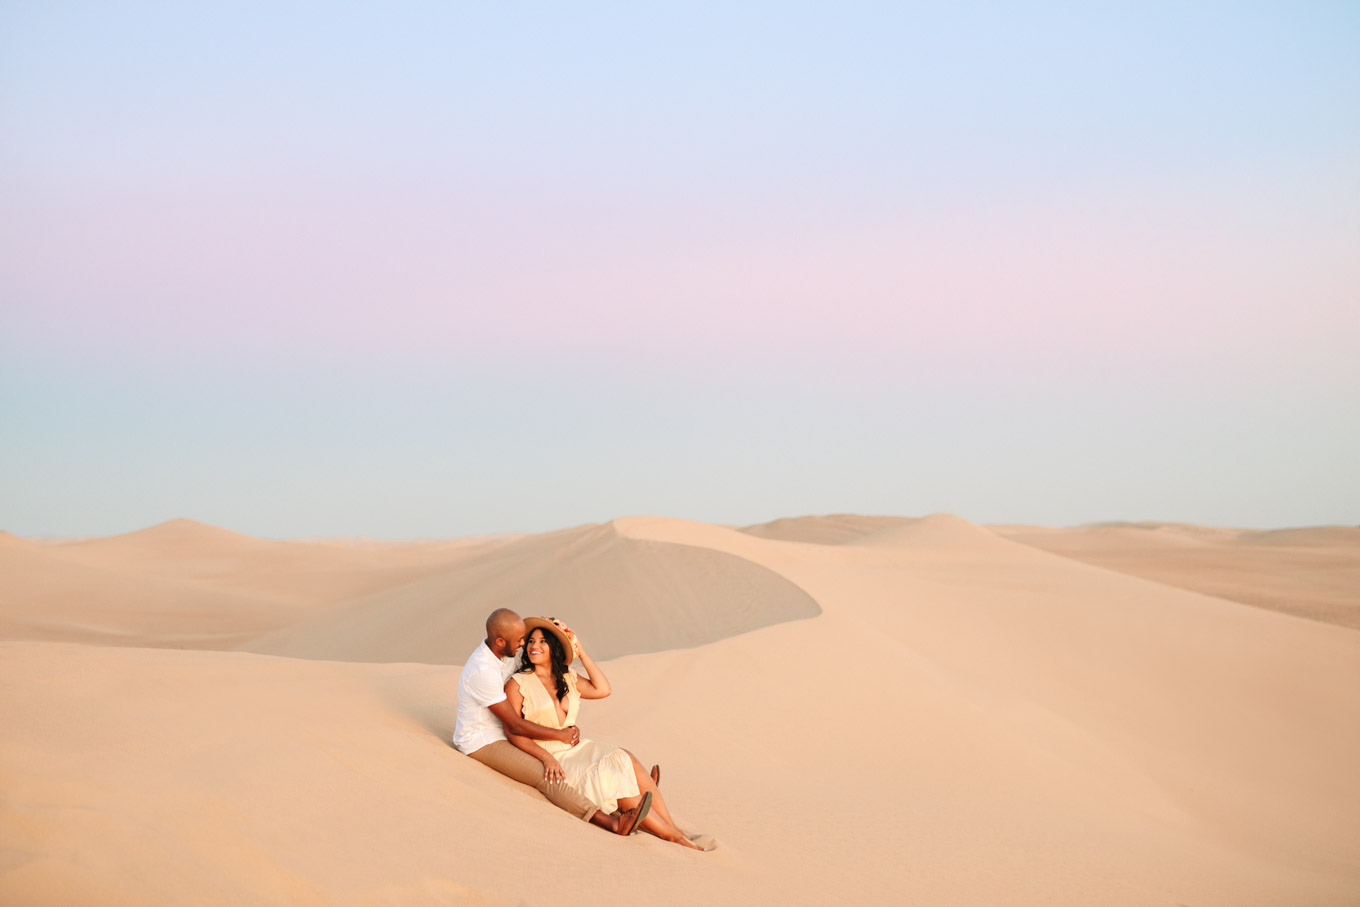 Wispy clouds above sand dune with engaged couple | California Sand Dunes engagement session | Colorful Palm Springs wedding photography | #palmspringsphotographer #sanddunes #engagementsession #southerncalifornia  Source: Mary Costa Photography | Los Angeles